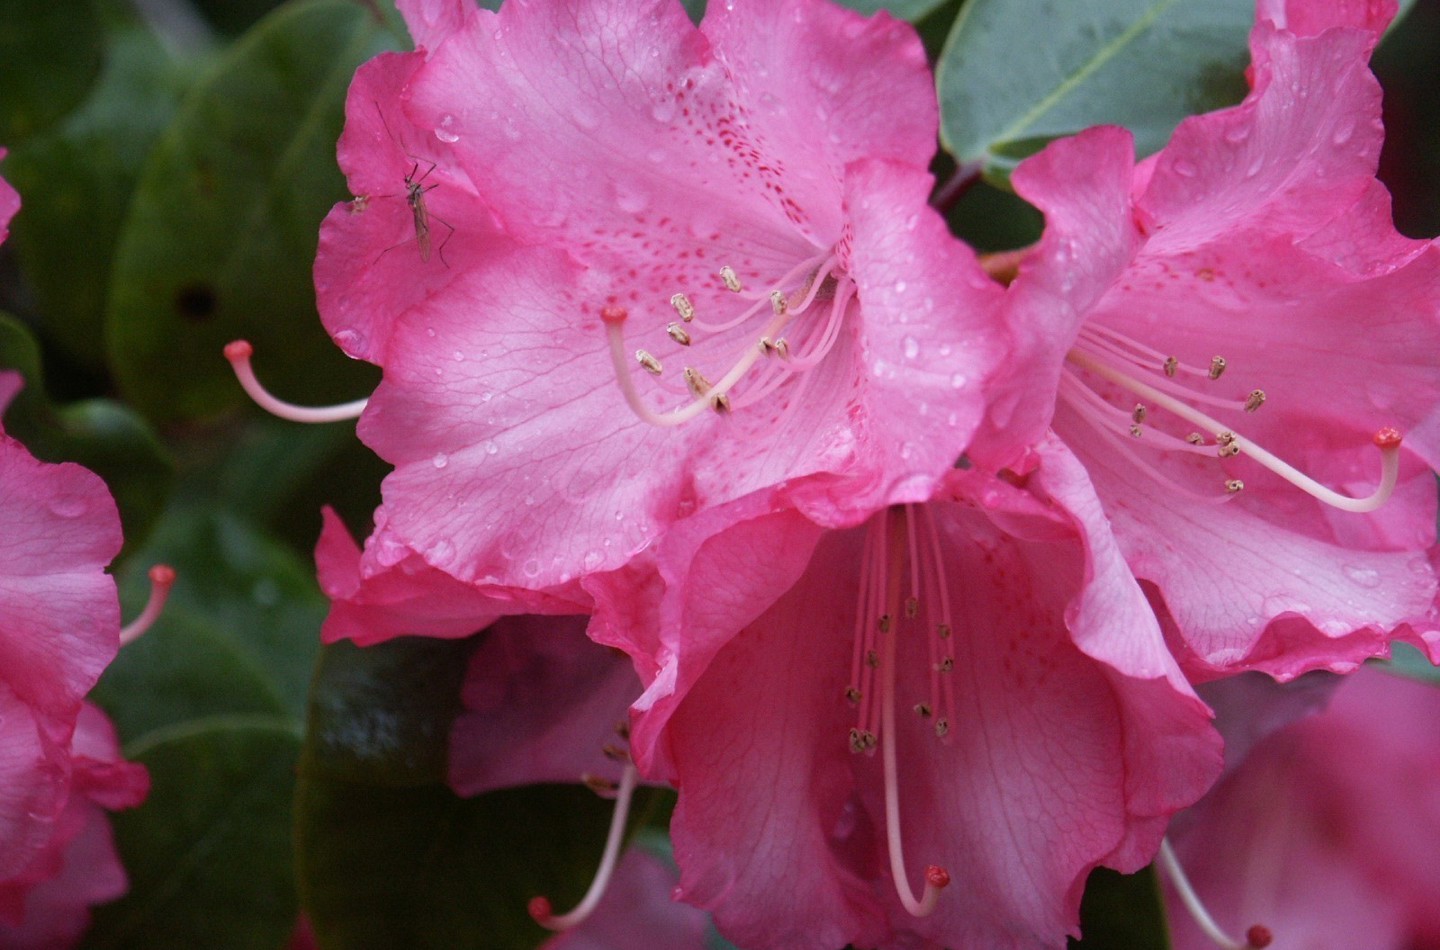 Rhododendron close-up